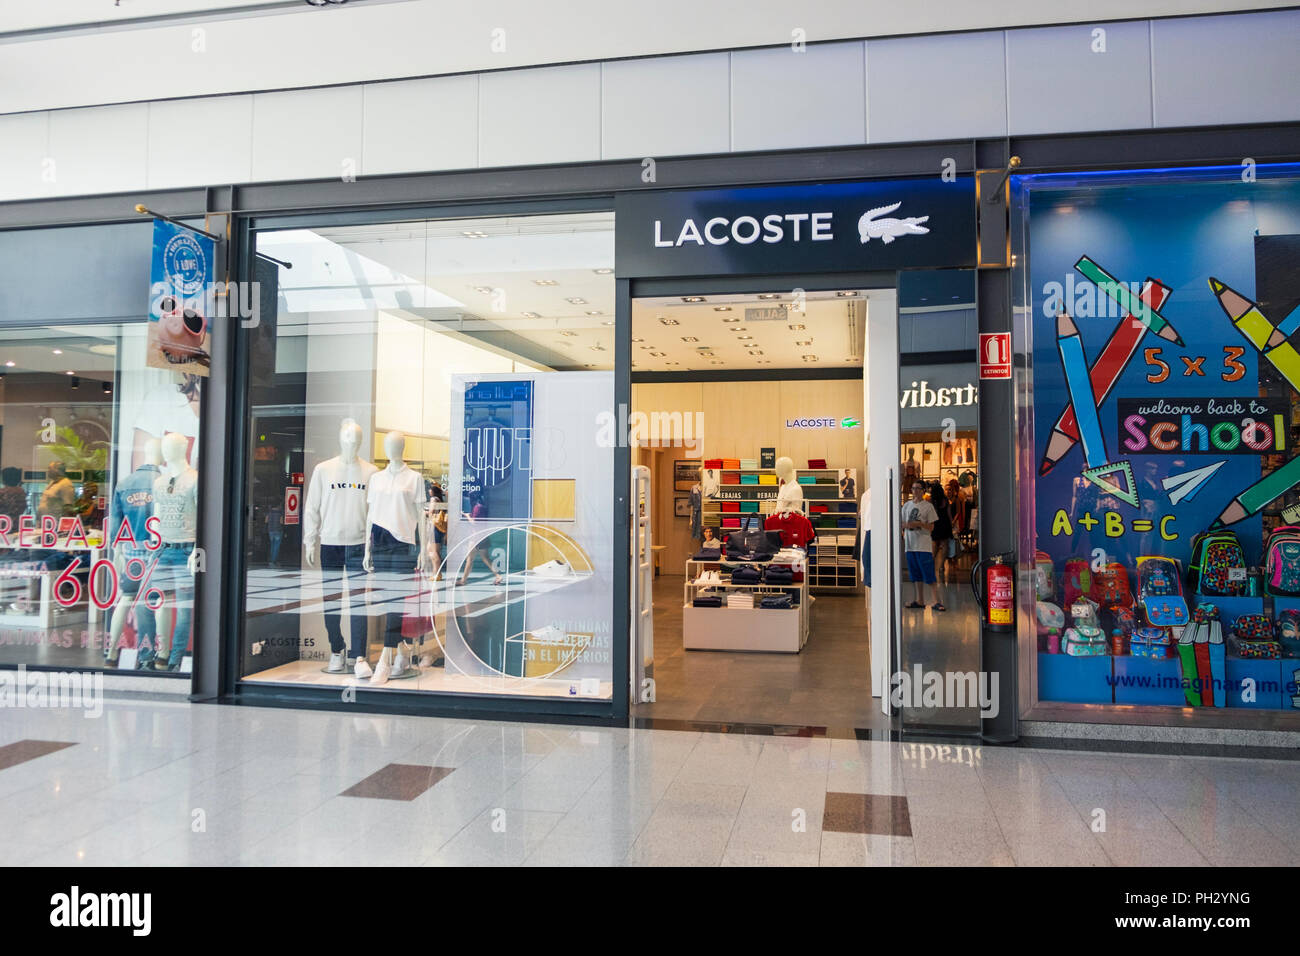 Lacoste store front, high street store front, uk Stock Photo - Alamy